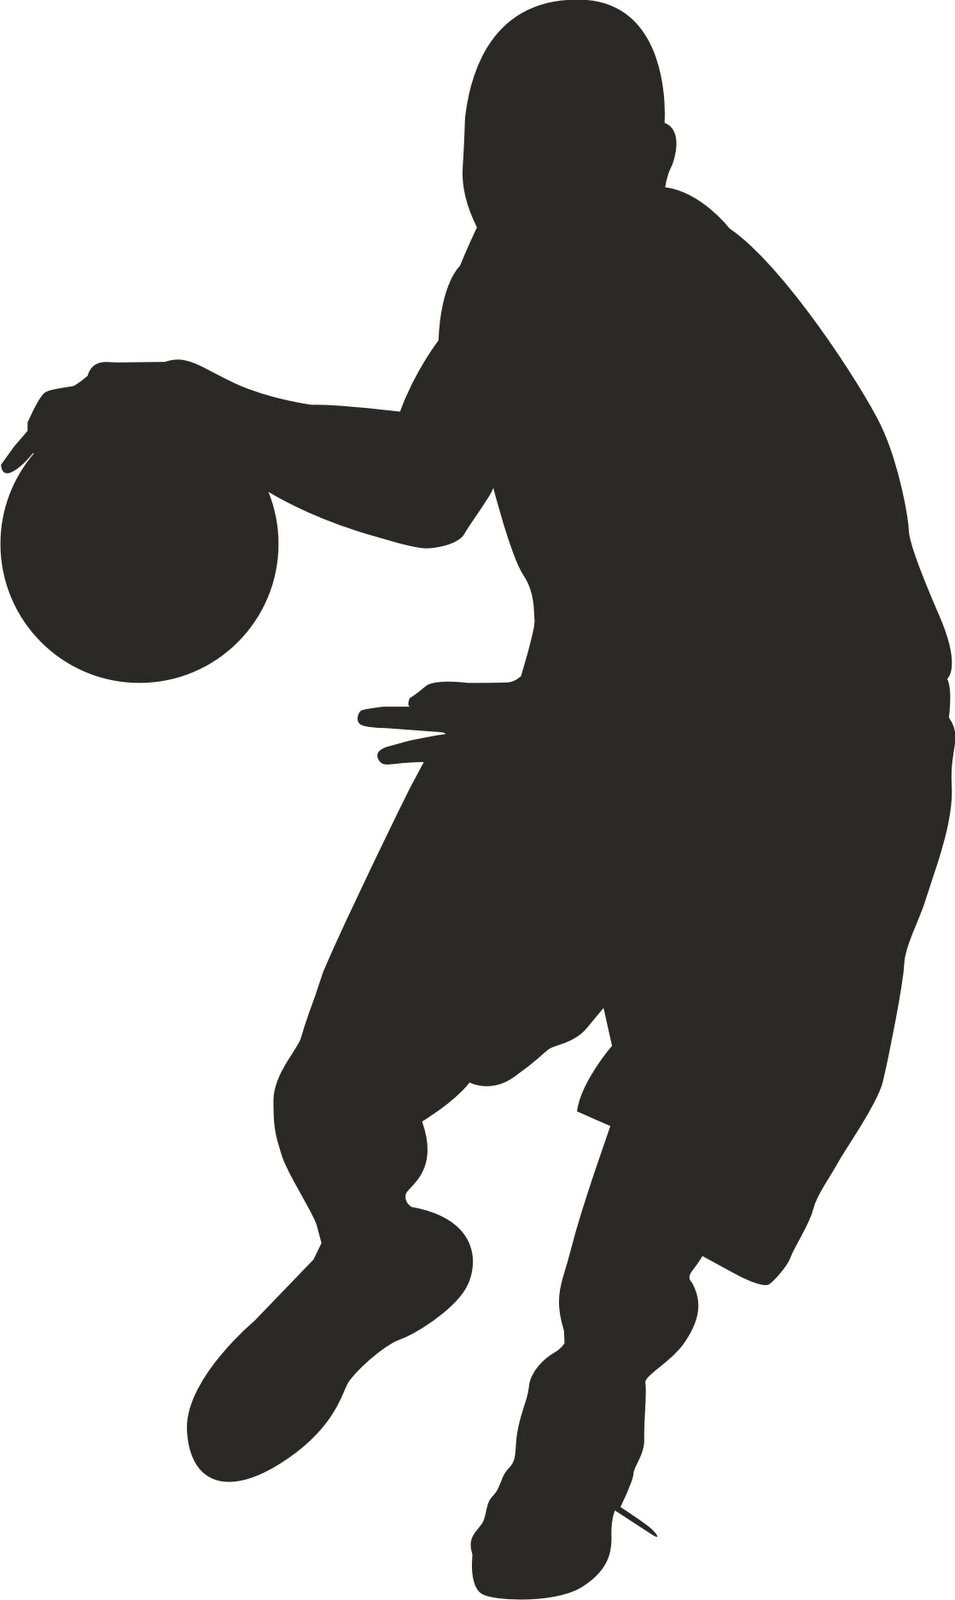 Animated Basketball Clipart   Clipart Best